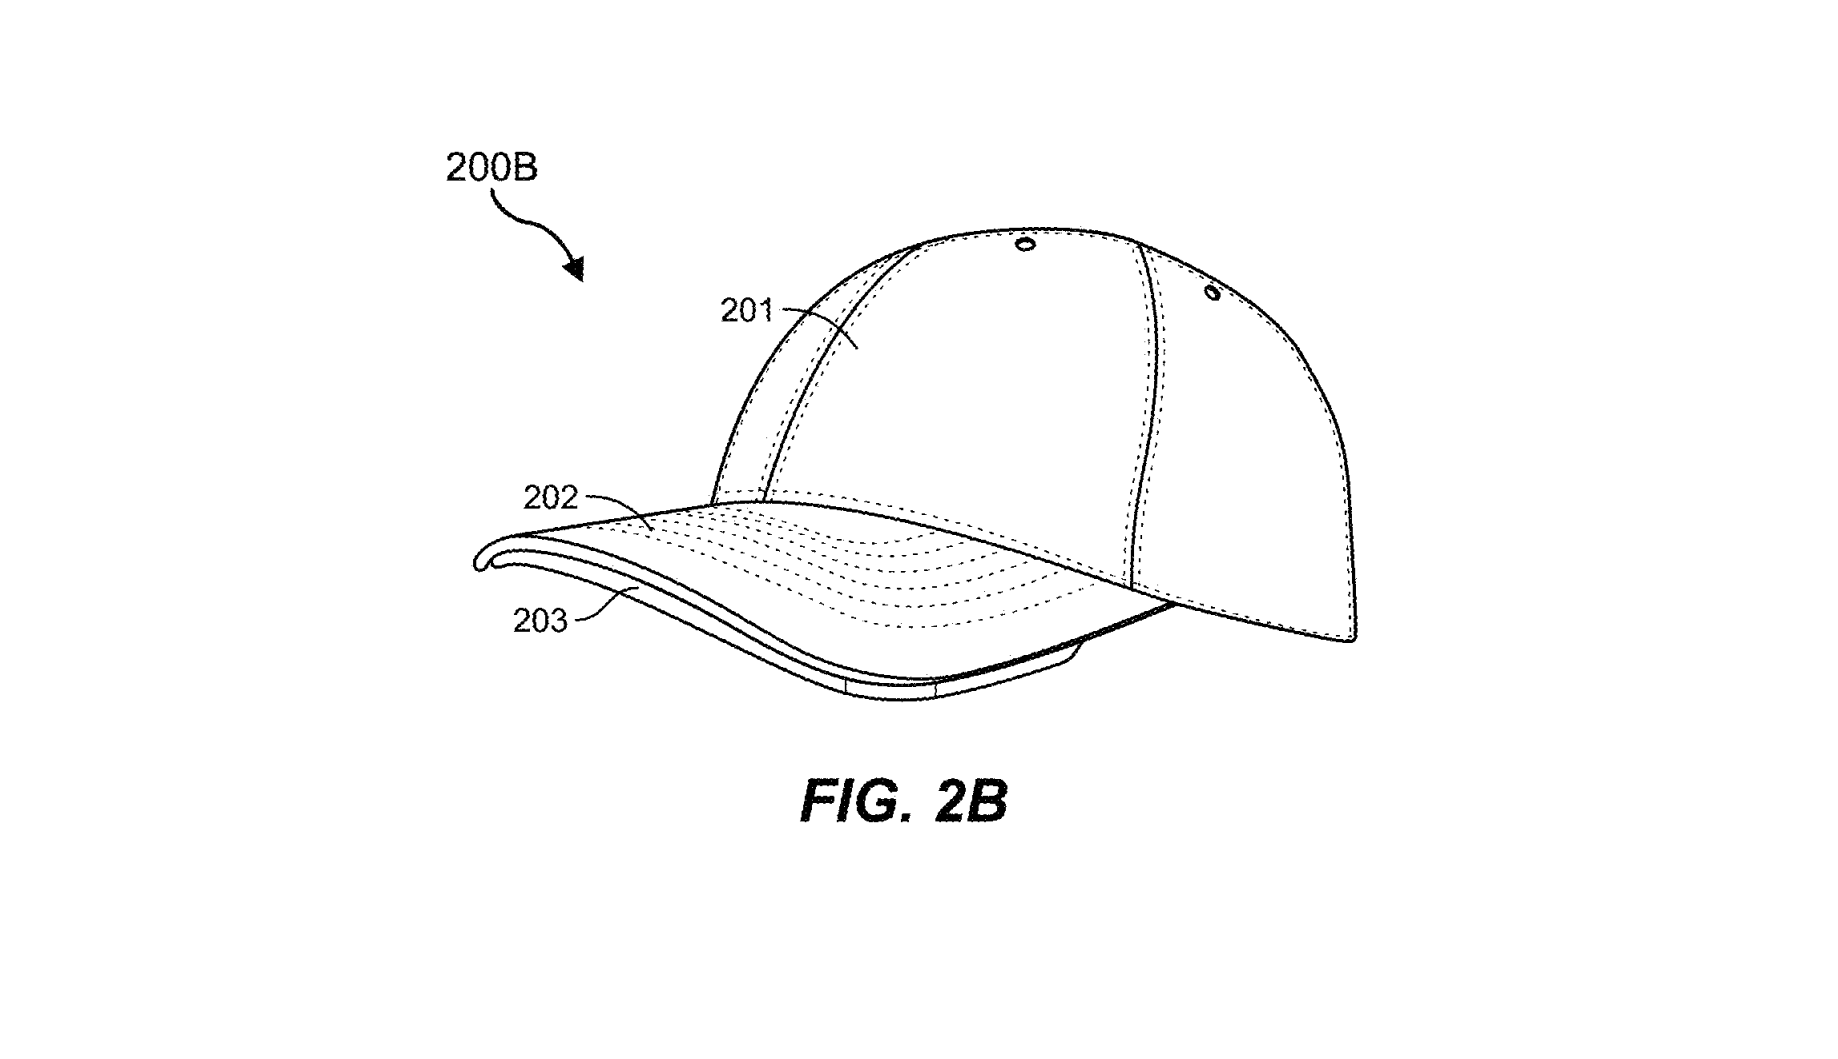 When not in use, Facebook imagines that the AR hat's display could be flipped up, so you don't have to feel awkward all the time while wearing it.  (Illustration: Facebook via the USPTO)